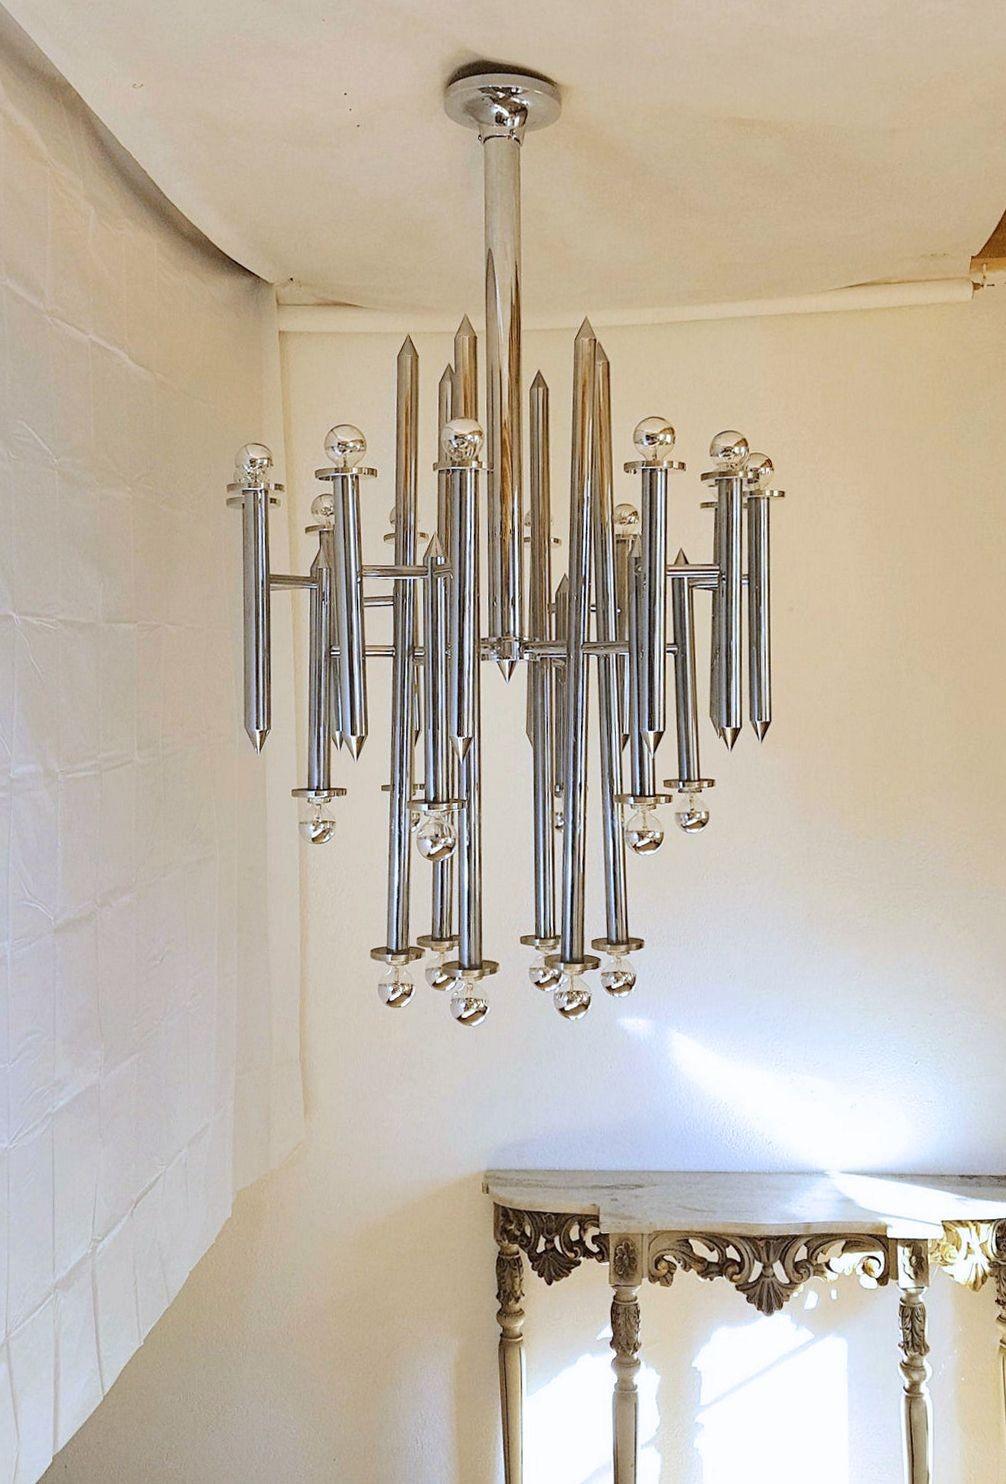 Very large nickel chromed Vintage chandelier, by Gaetano Sciolari, Italy 1970s.
The architectural chandelier is made of nickle tubes.
The Mid-Century Modern Modern chandelier has 24 lights: 12 up and 12 down.
The Italian large chandelier is